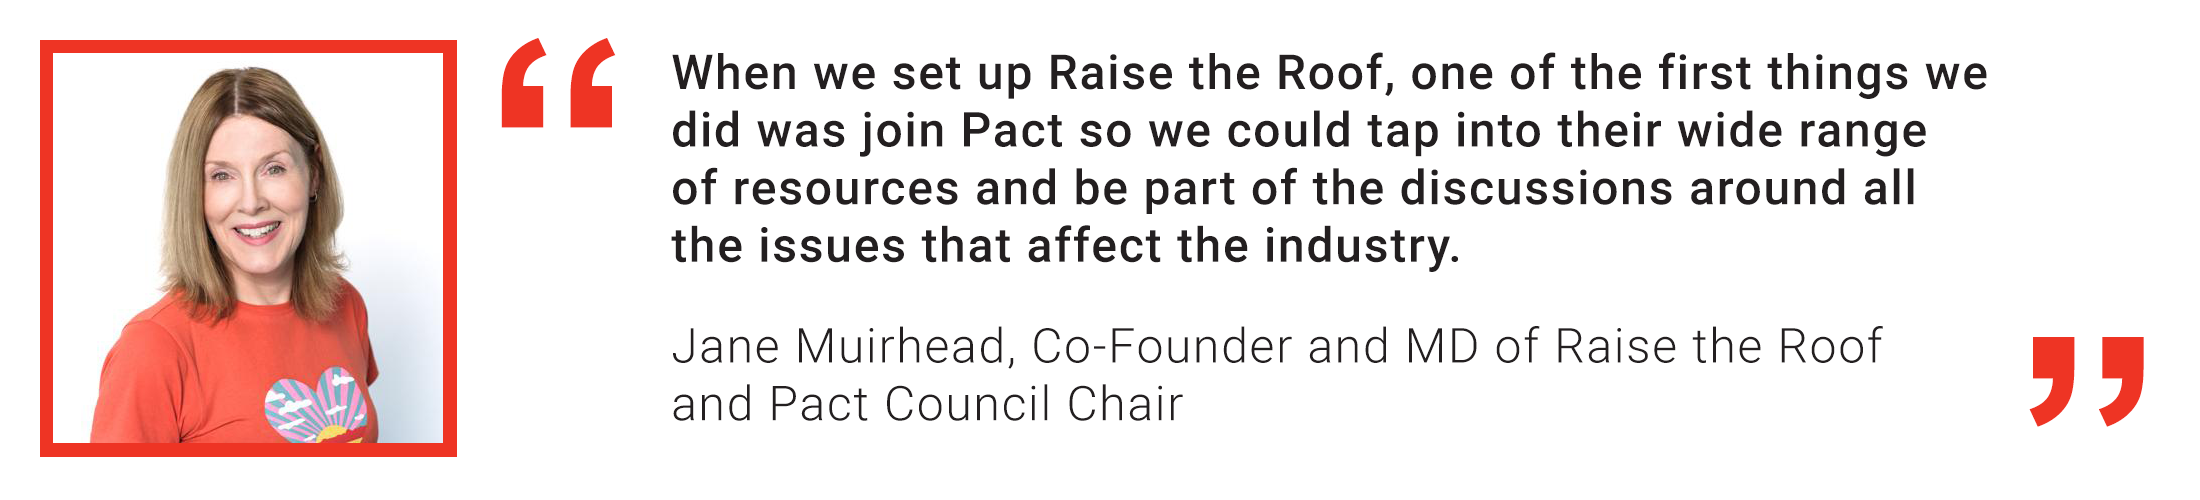 Member quote from Jane Muirhead of Raise the Roof Productions: When we set up Raise the Roof, one of the first things we did was join Pact so we could tap into their wide range of resources and be par